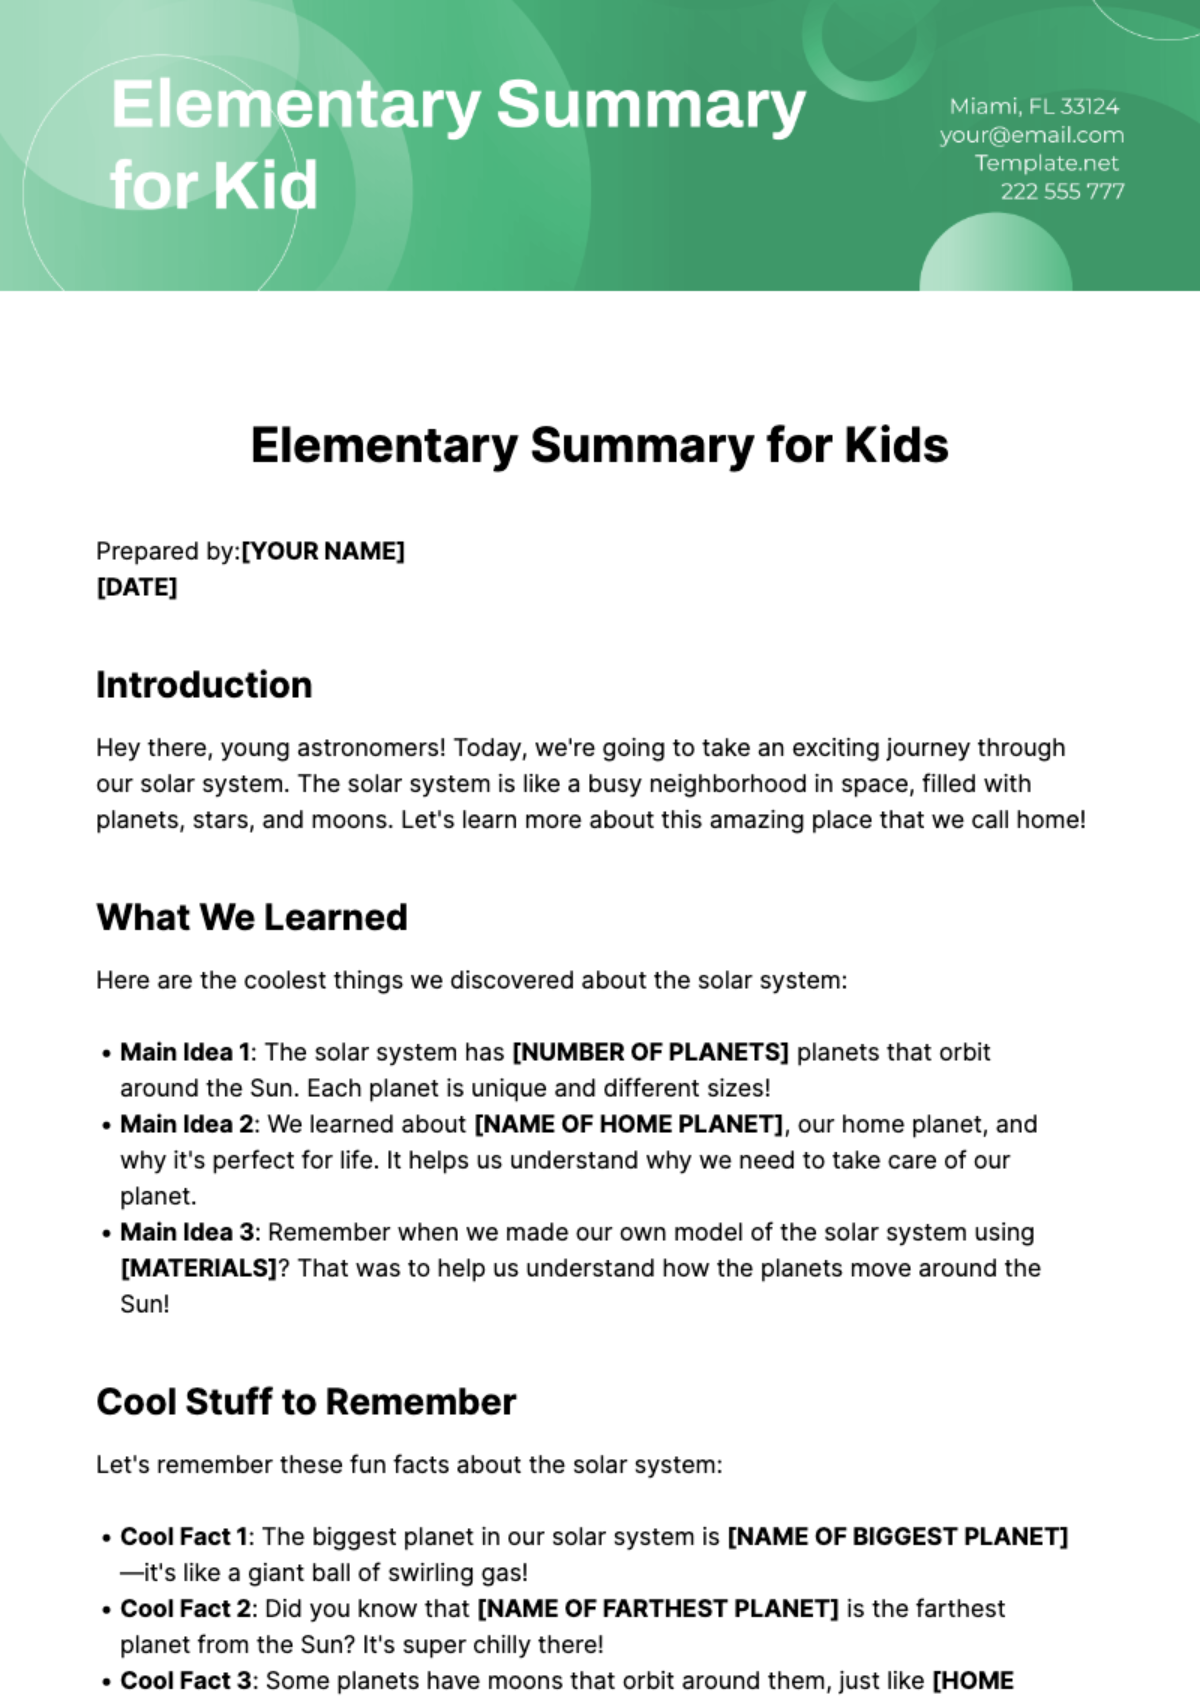 Elementary Summary for Kids Template